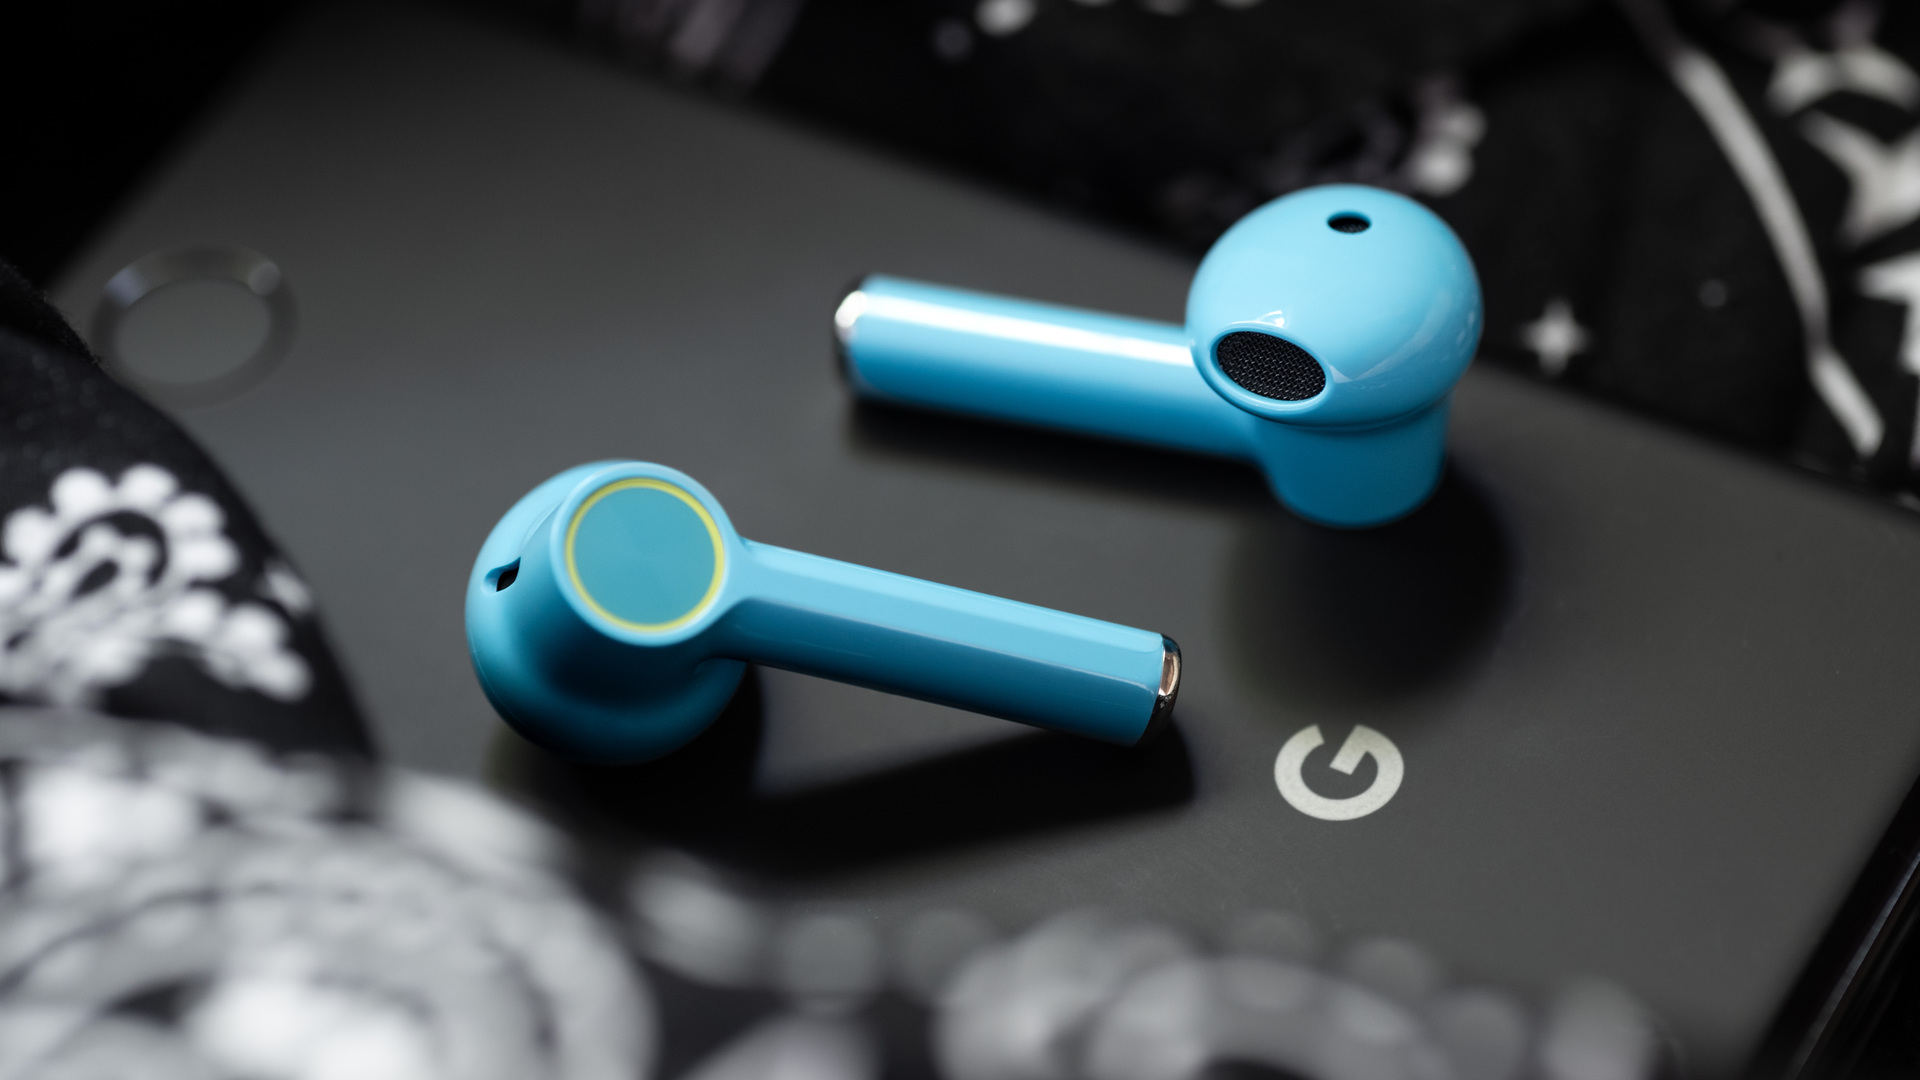 A picture of the OnePlus Buds true wireless earbuds (Nord Blue color) on a Google Pixel 3 smartphone.